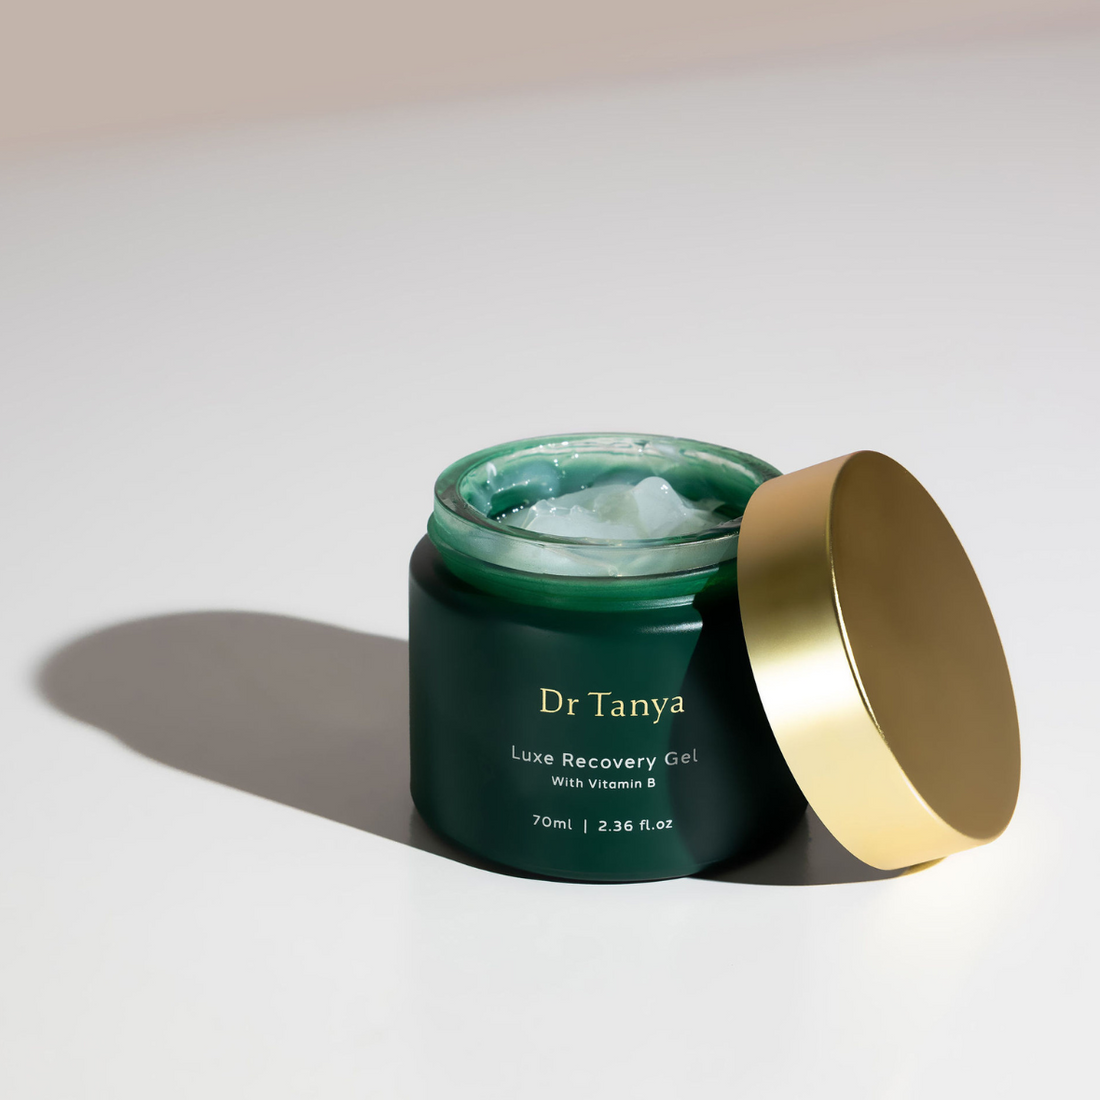 An emerald coloured pot of facial gel with a gold lid propped against it